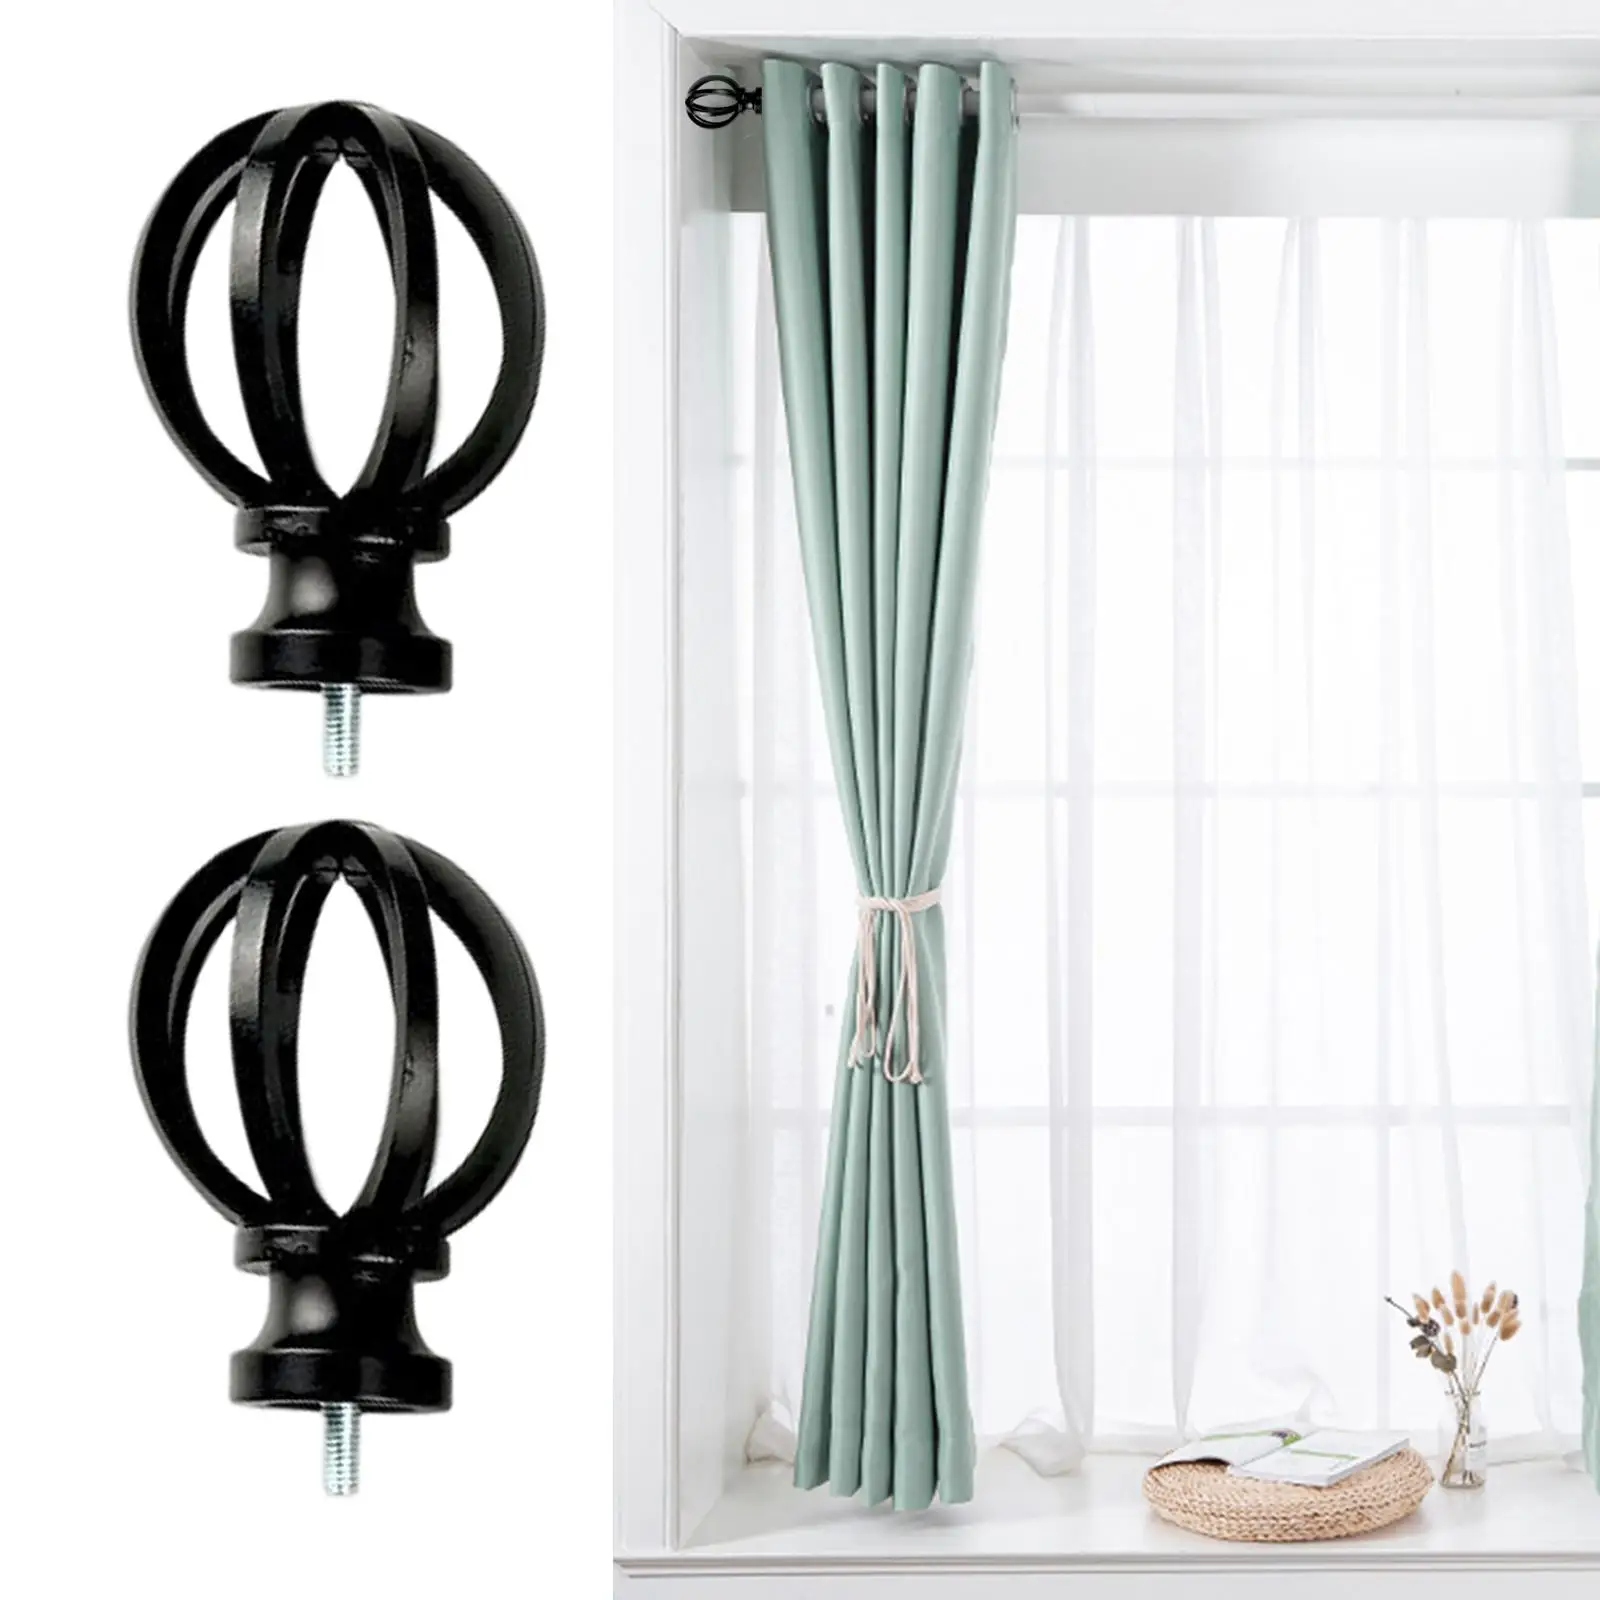 2x Cage Curtain Rod Finials 5/8 inch Diameter Decoration Hardware Vintage Drapery Rod Finials for Living Room Home Office